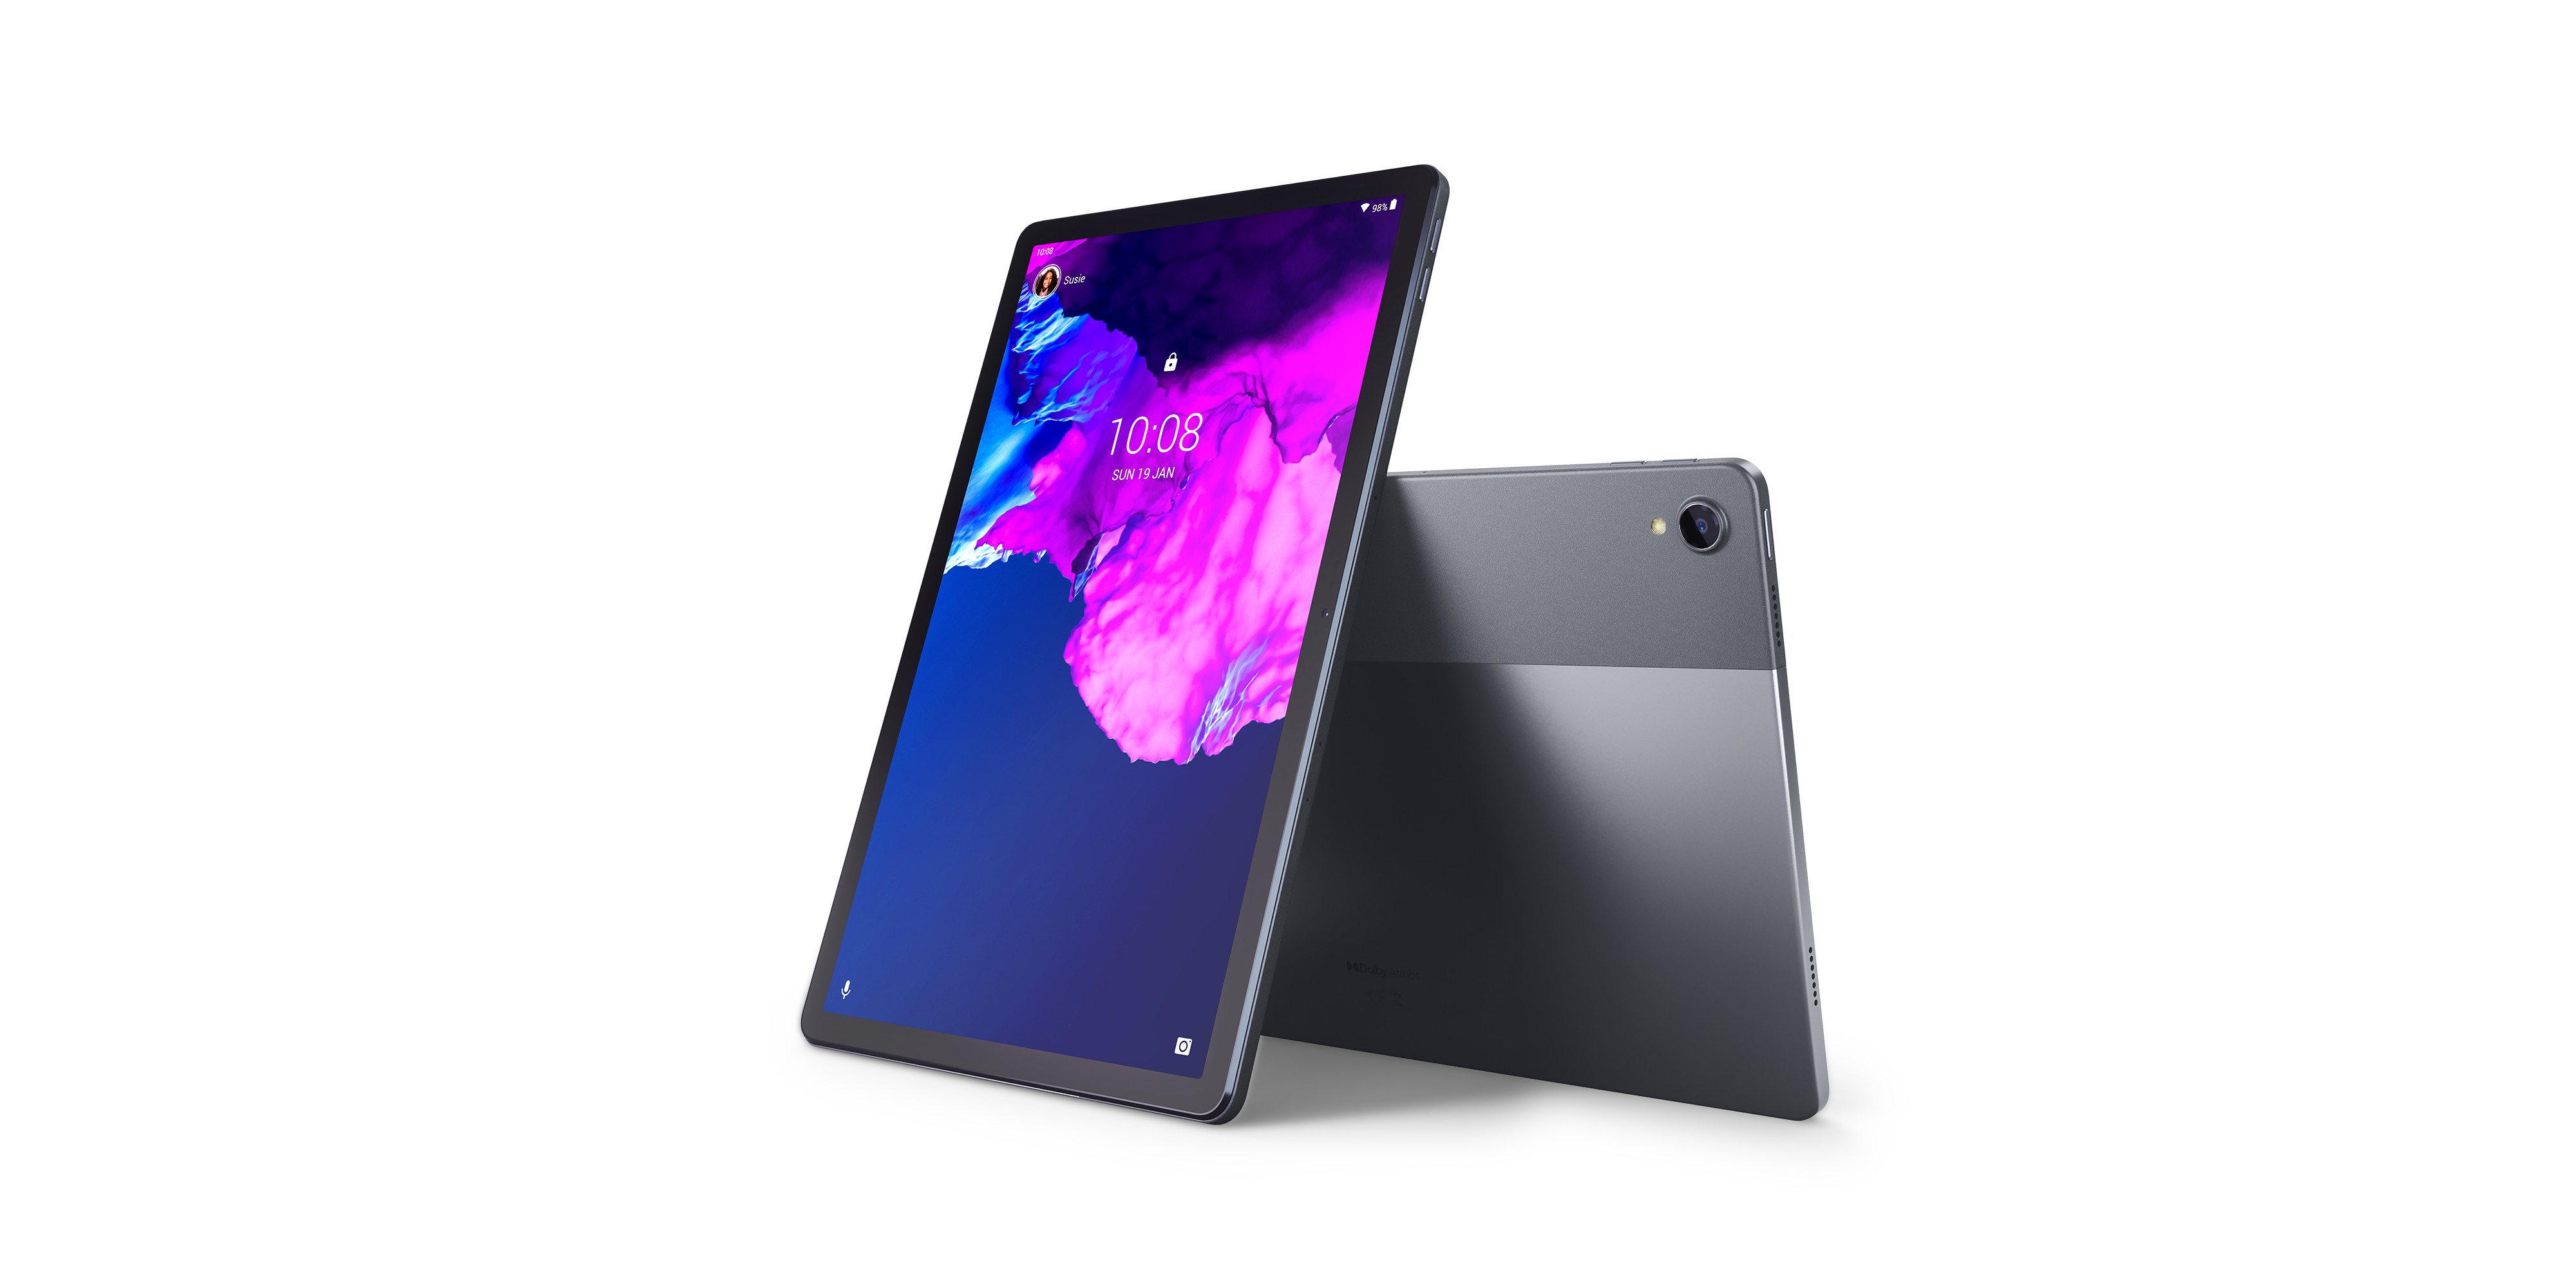 Lenovo Tab P11, $229 Android tablet launches this month - 9to5Google